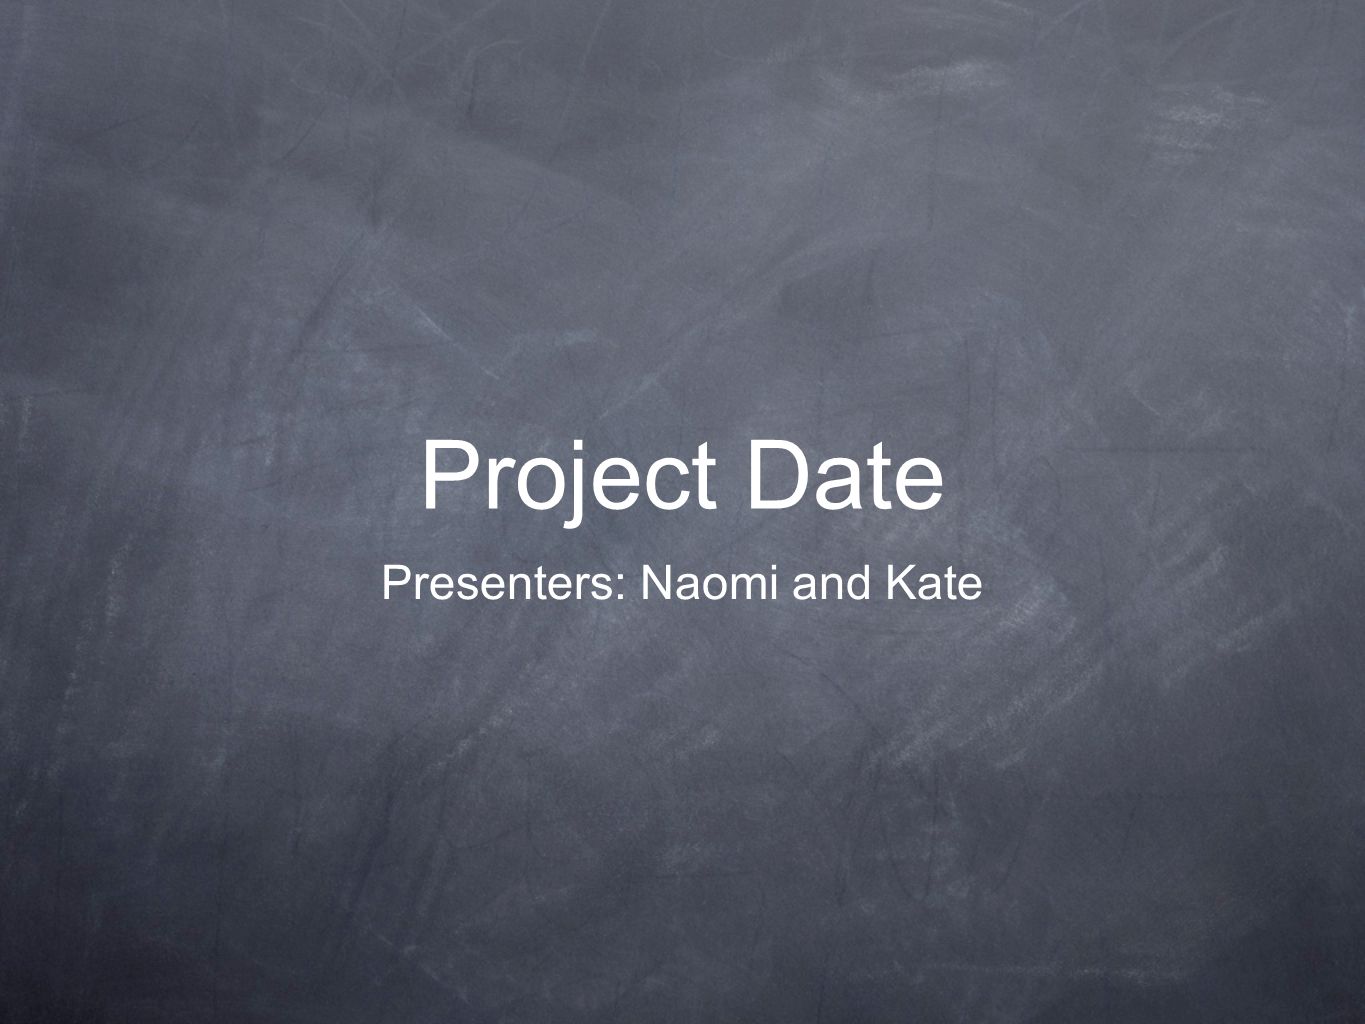 Project Date Presenters: Naomi and Kate